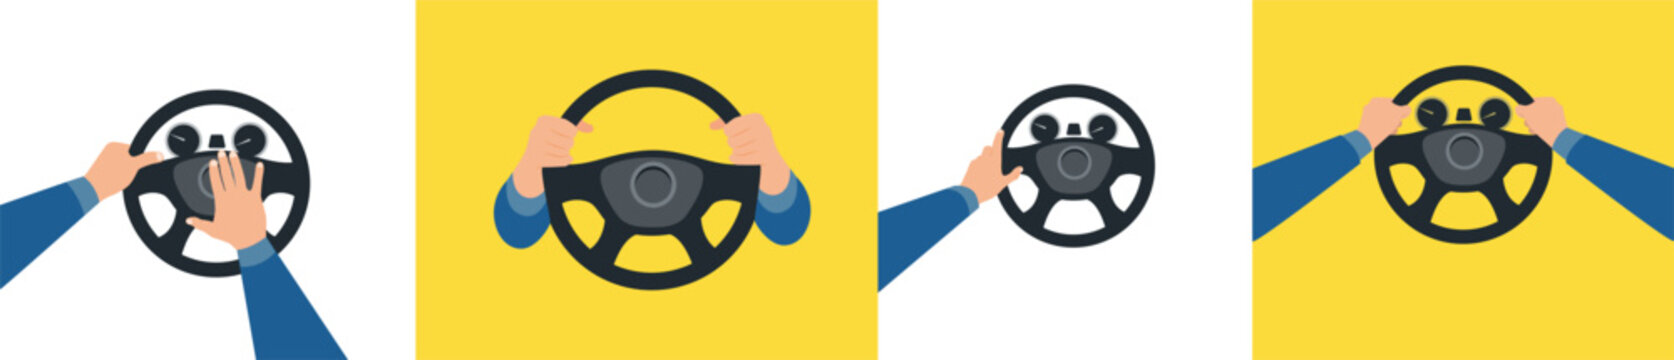 Hands behind wheel icon. Hands on the steering wheel of a car.